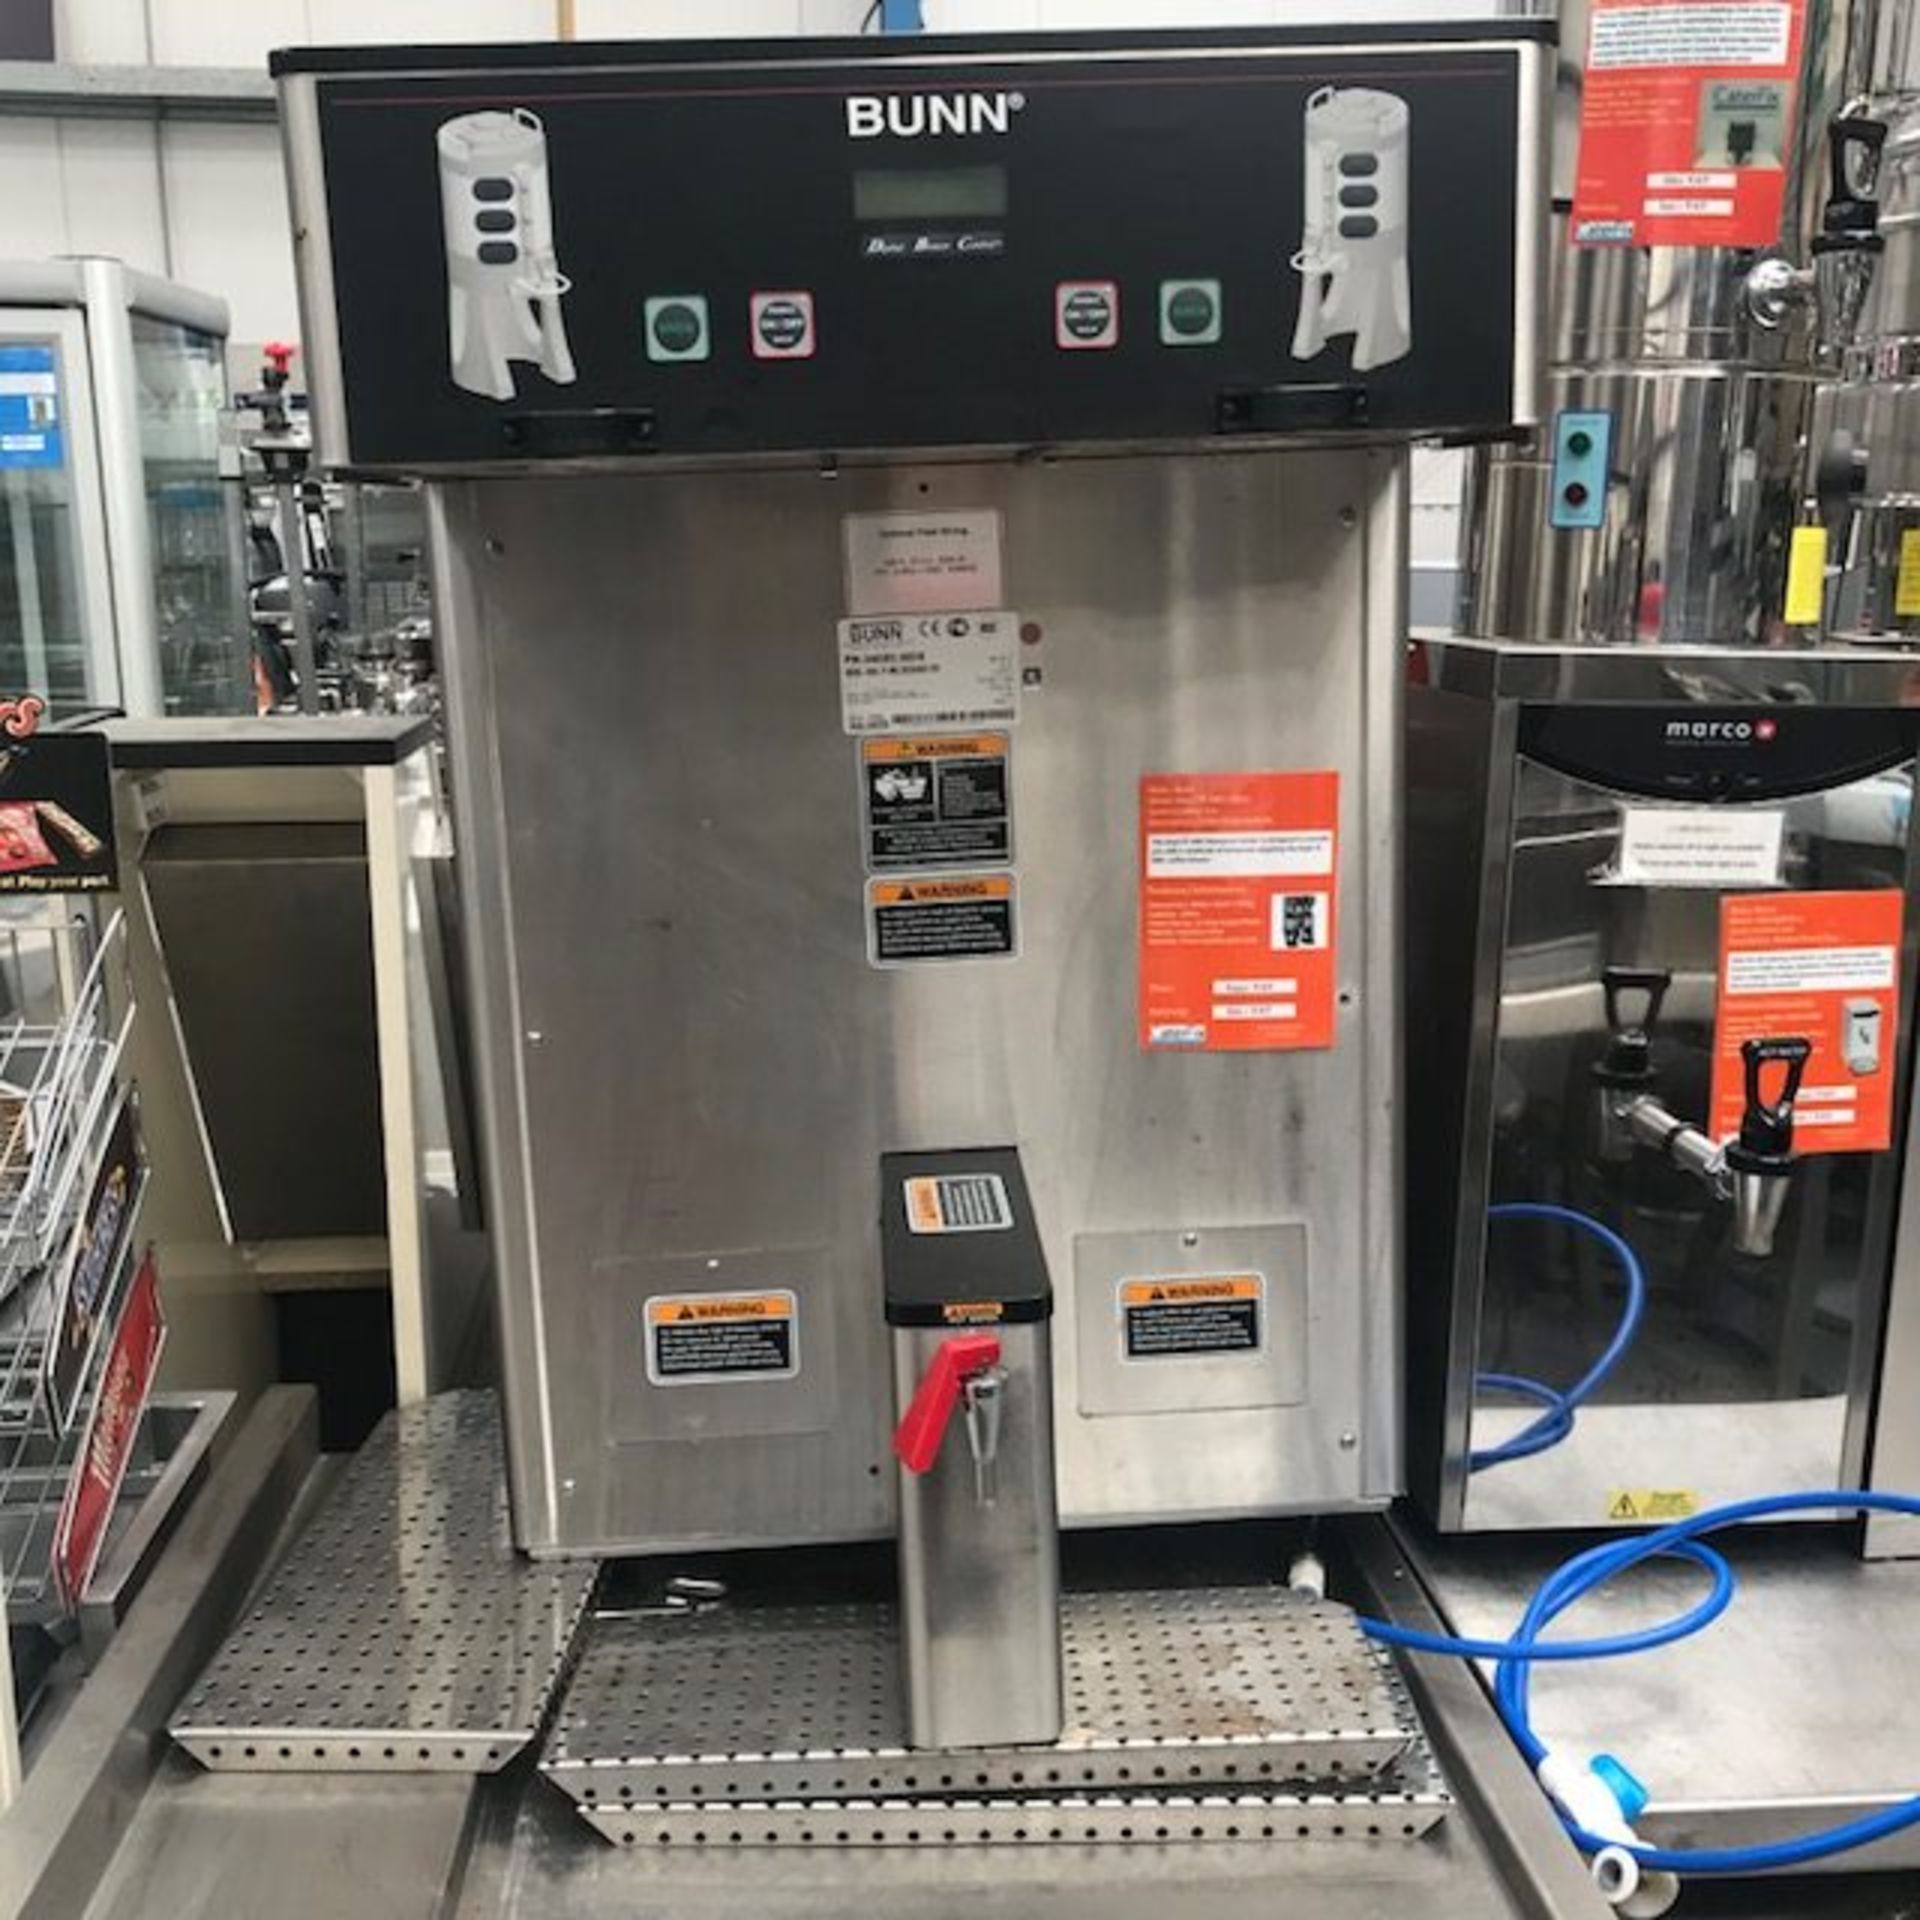 Bunn Coffee brew system Dual TF DBC CE230 The Dual TF DBC Resource Centre is designed to provide you